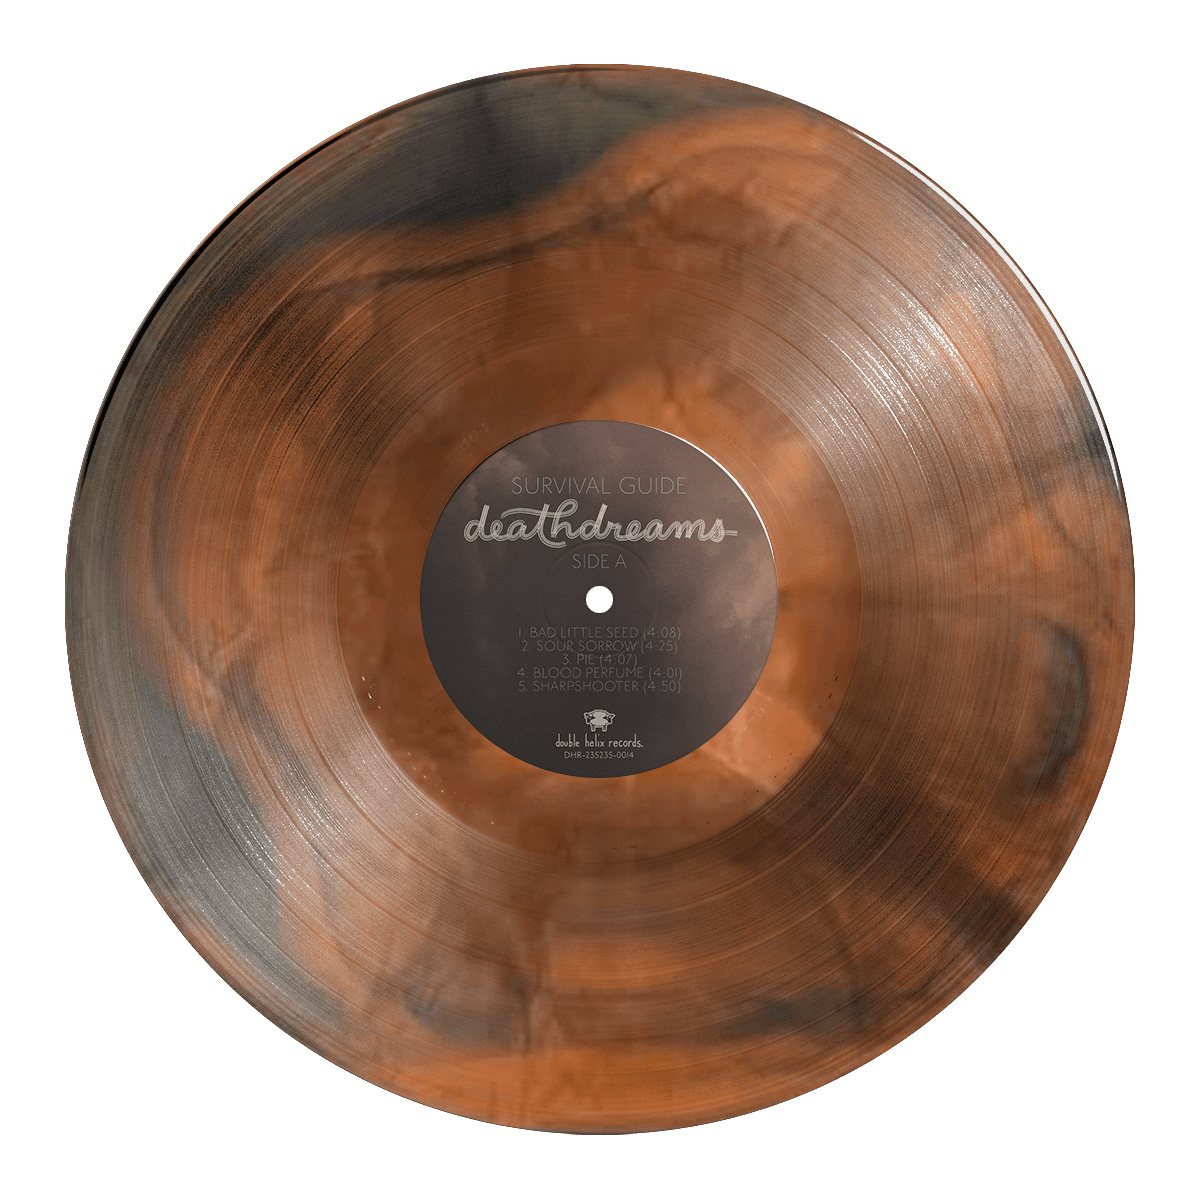 deathdreams Cloud Variant Vinyl (Limited Edition of 100)